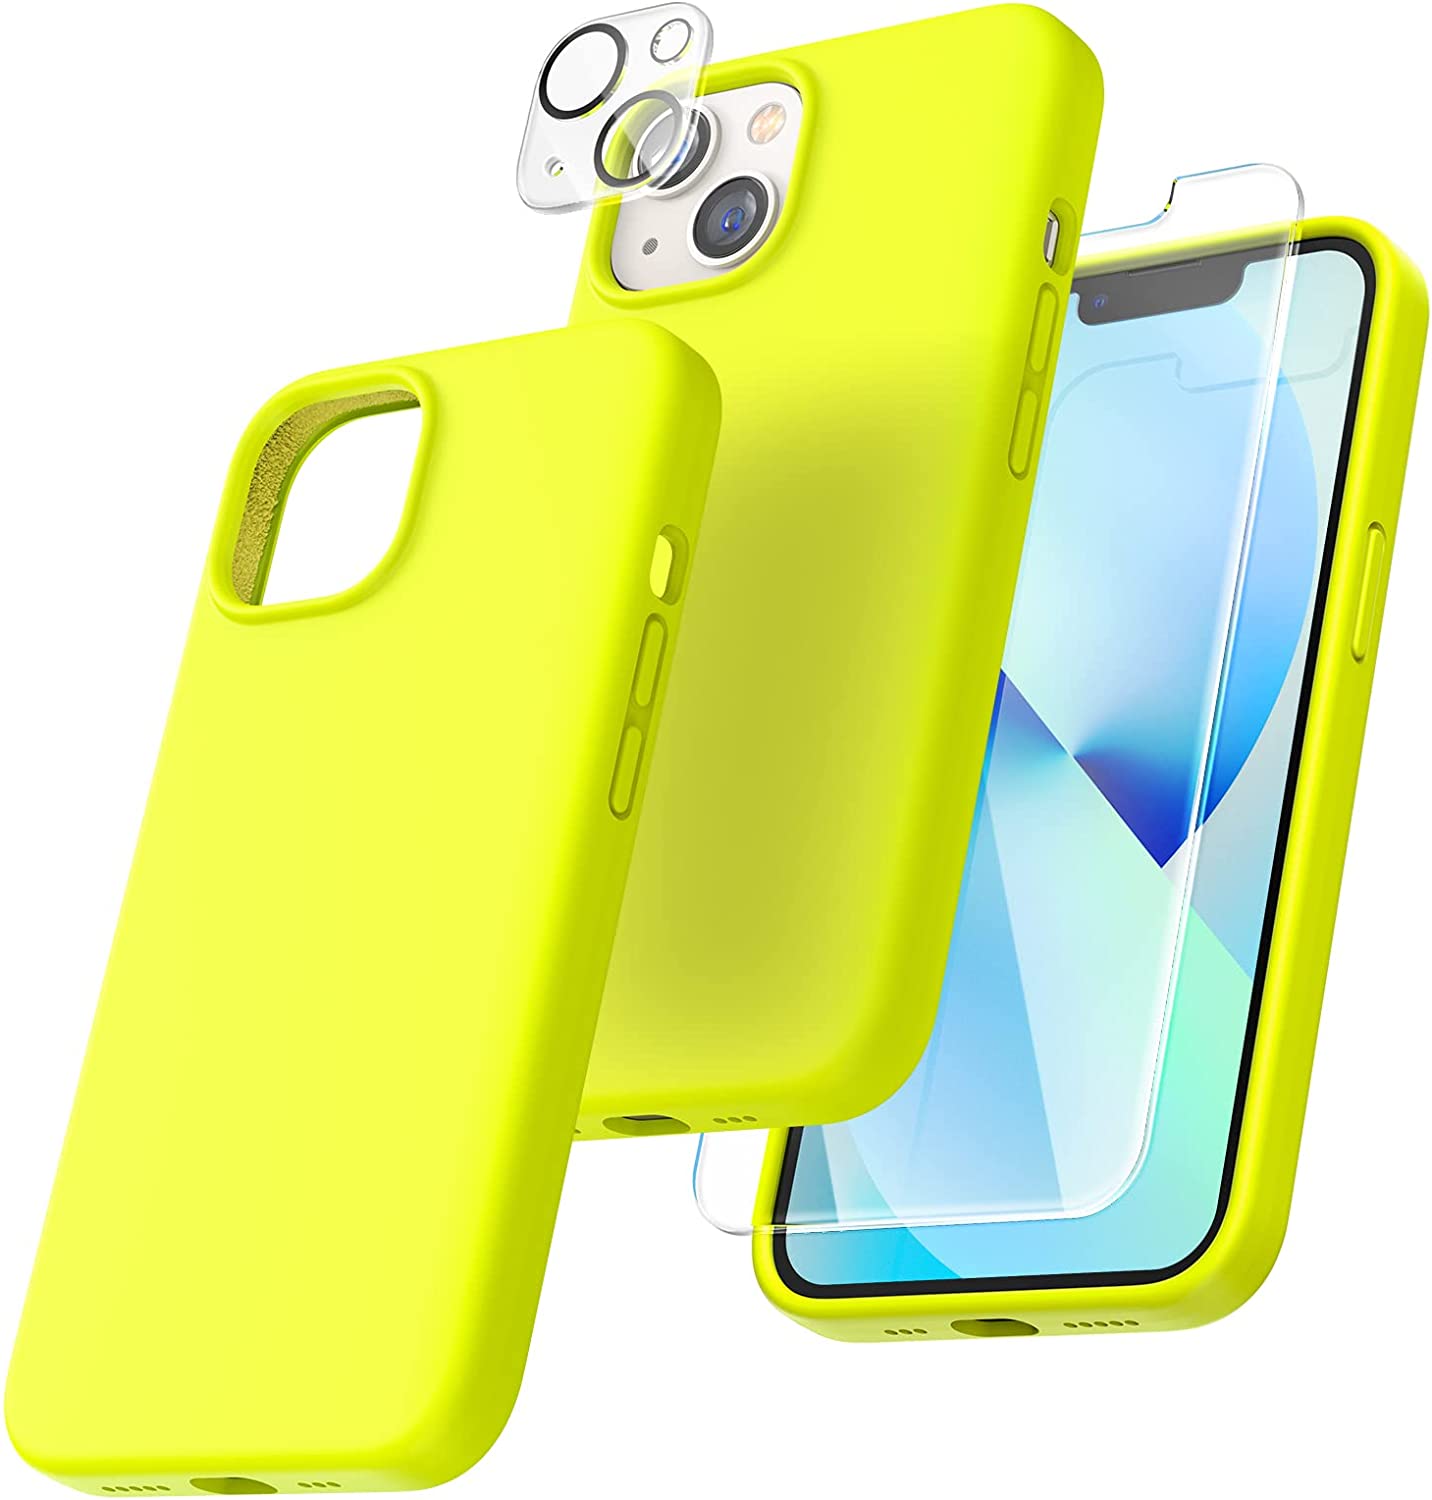 TOCOL [5 in 1] for iPhone 13 Case, with 2 Pack Screen Protector + 2 Pack Camera Lens Protector, Slim Liquid Silicone Phone Case iPhone 13 6.1 Inch, [Anti-Scratch] [Drop Protection],Fluorescent Yellow